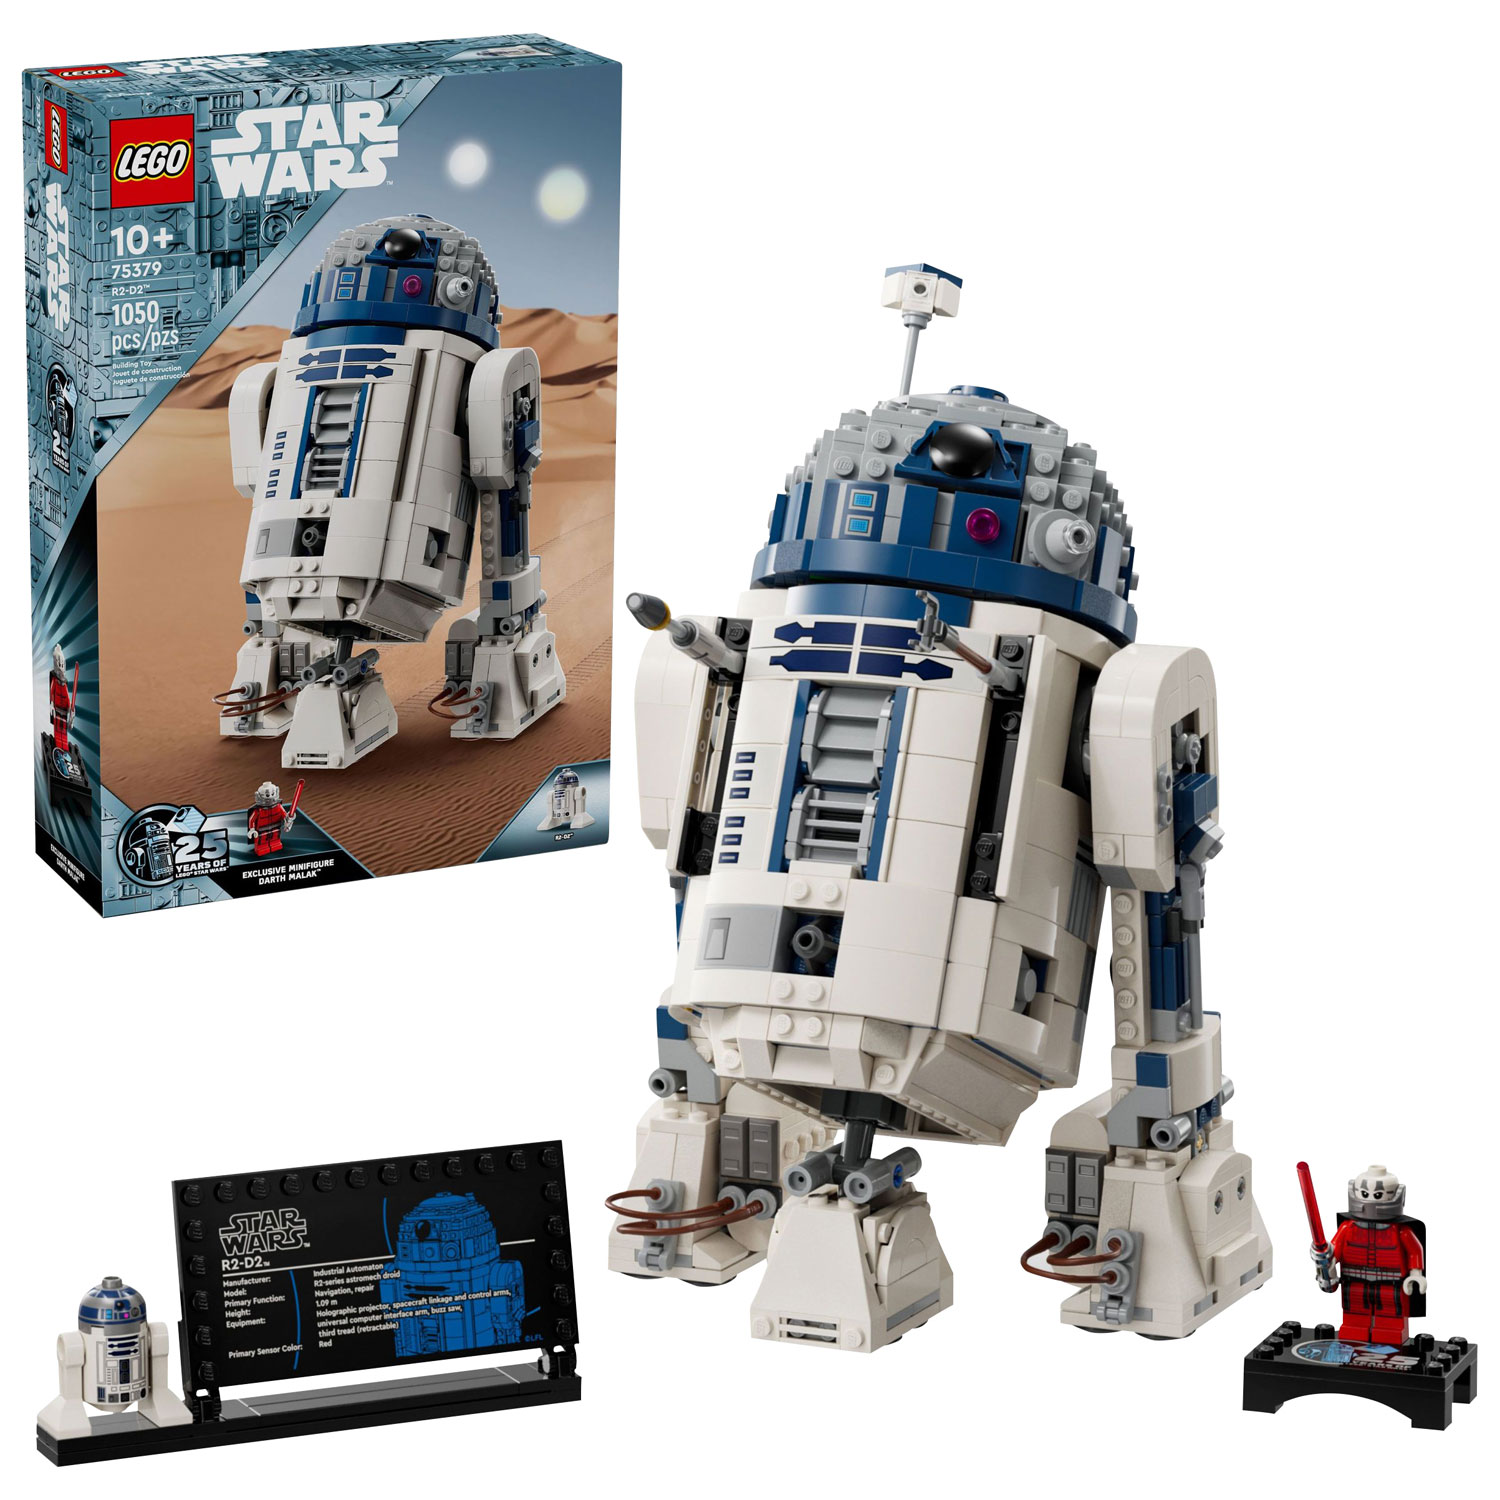 LEGO Star Wars: R2-D2 Toy Figure - 1050 Pieces (75379)